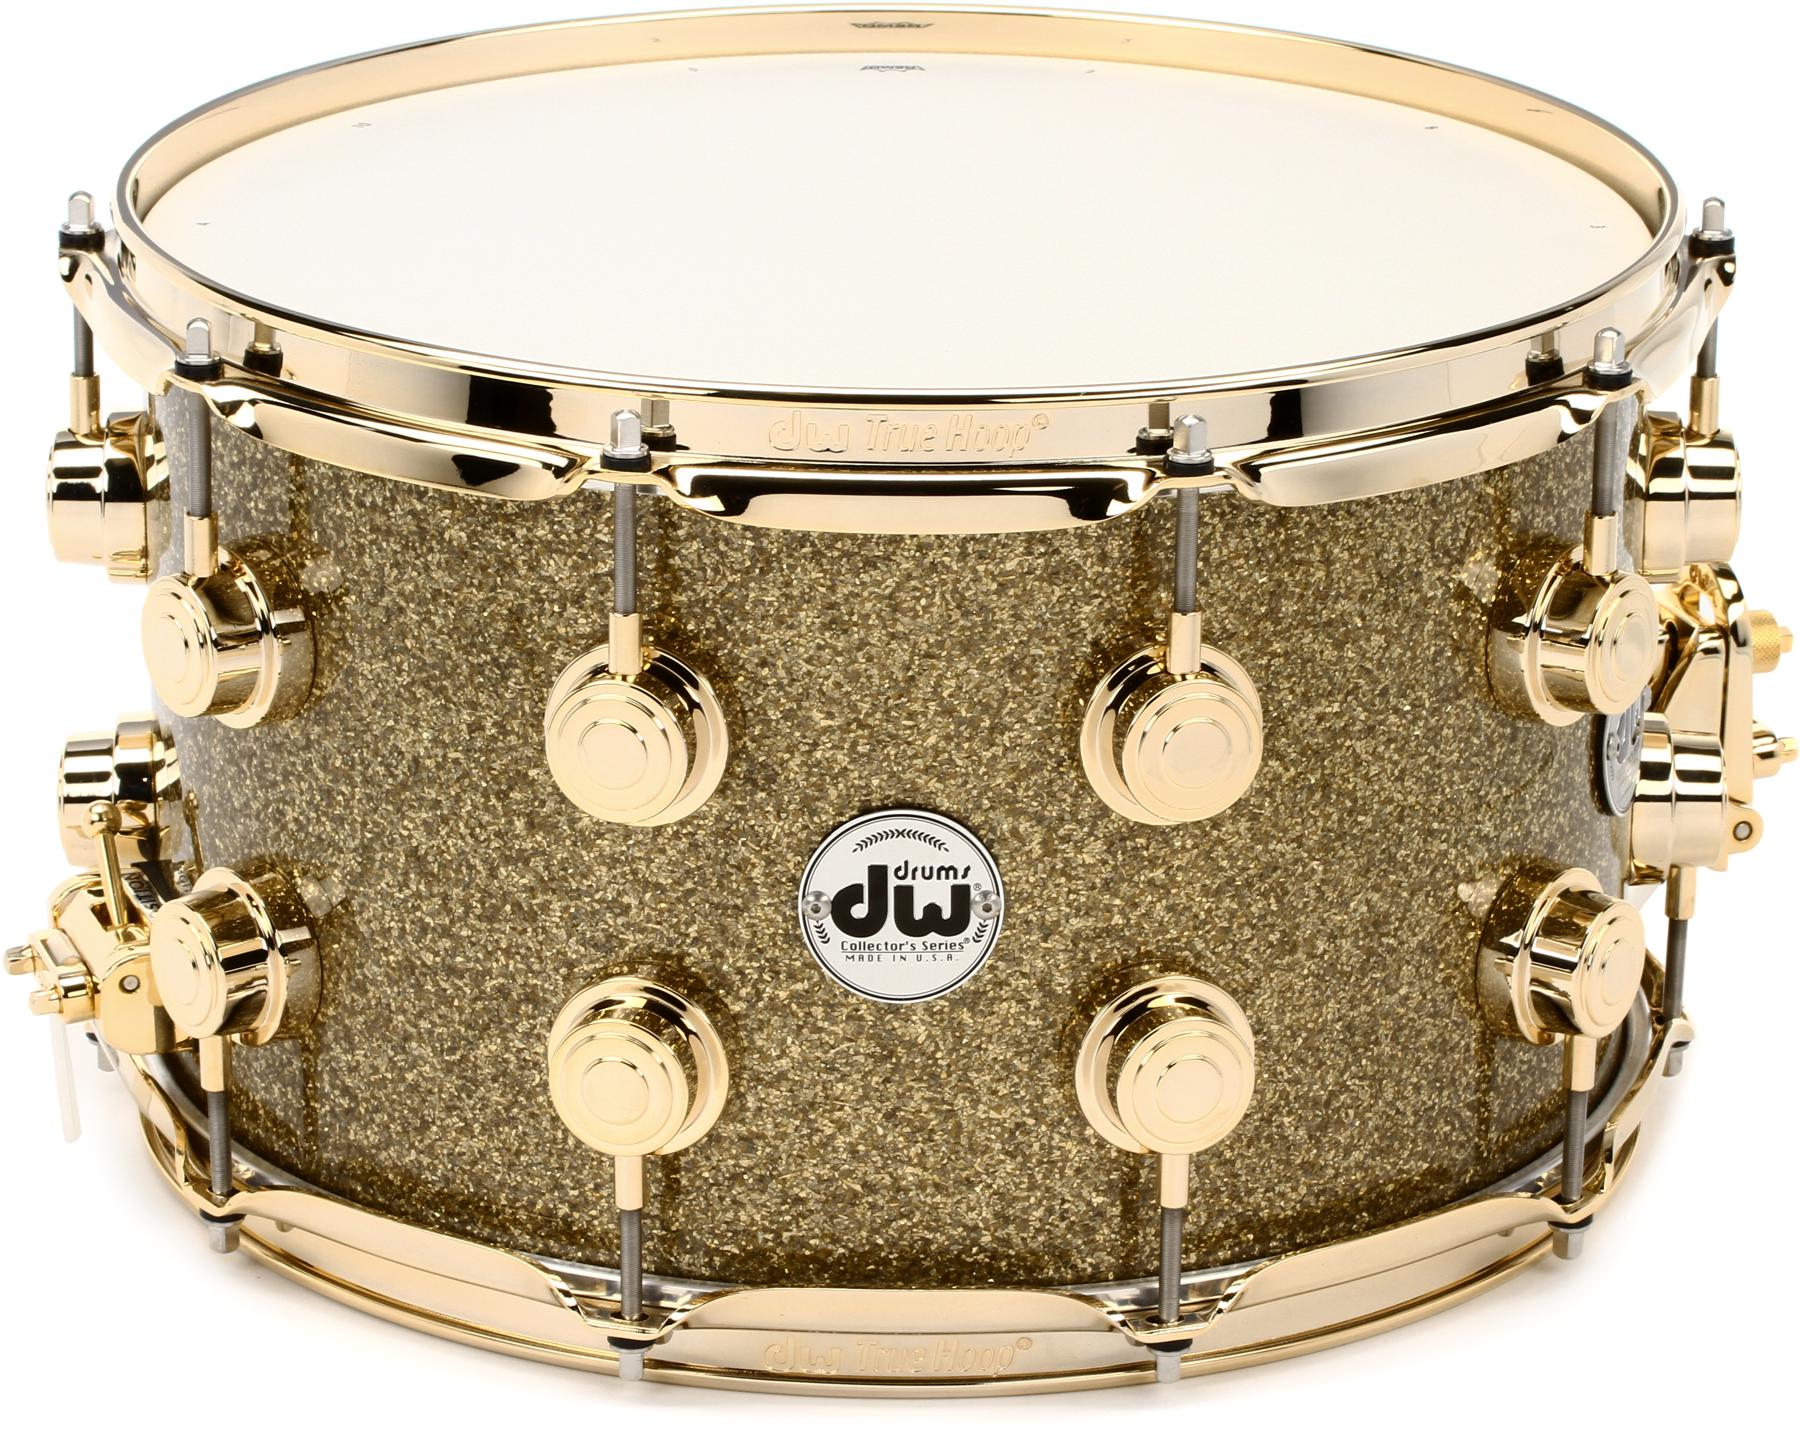 DW Collector's Series Snare Drum - 8 inch x 14 inch, Gold Glass FinishPly with Gold Hardware